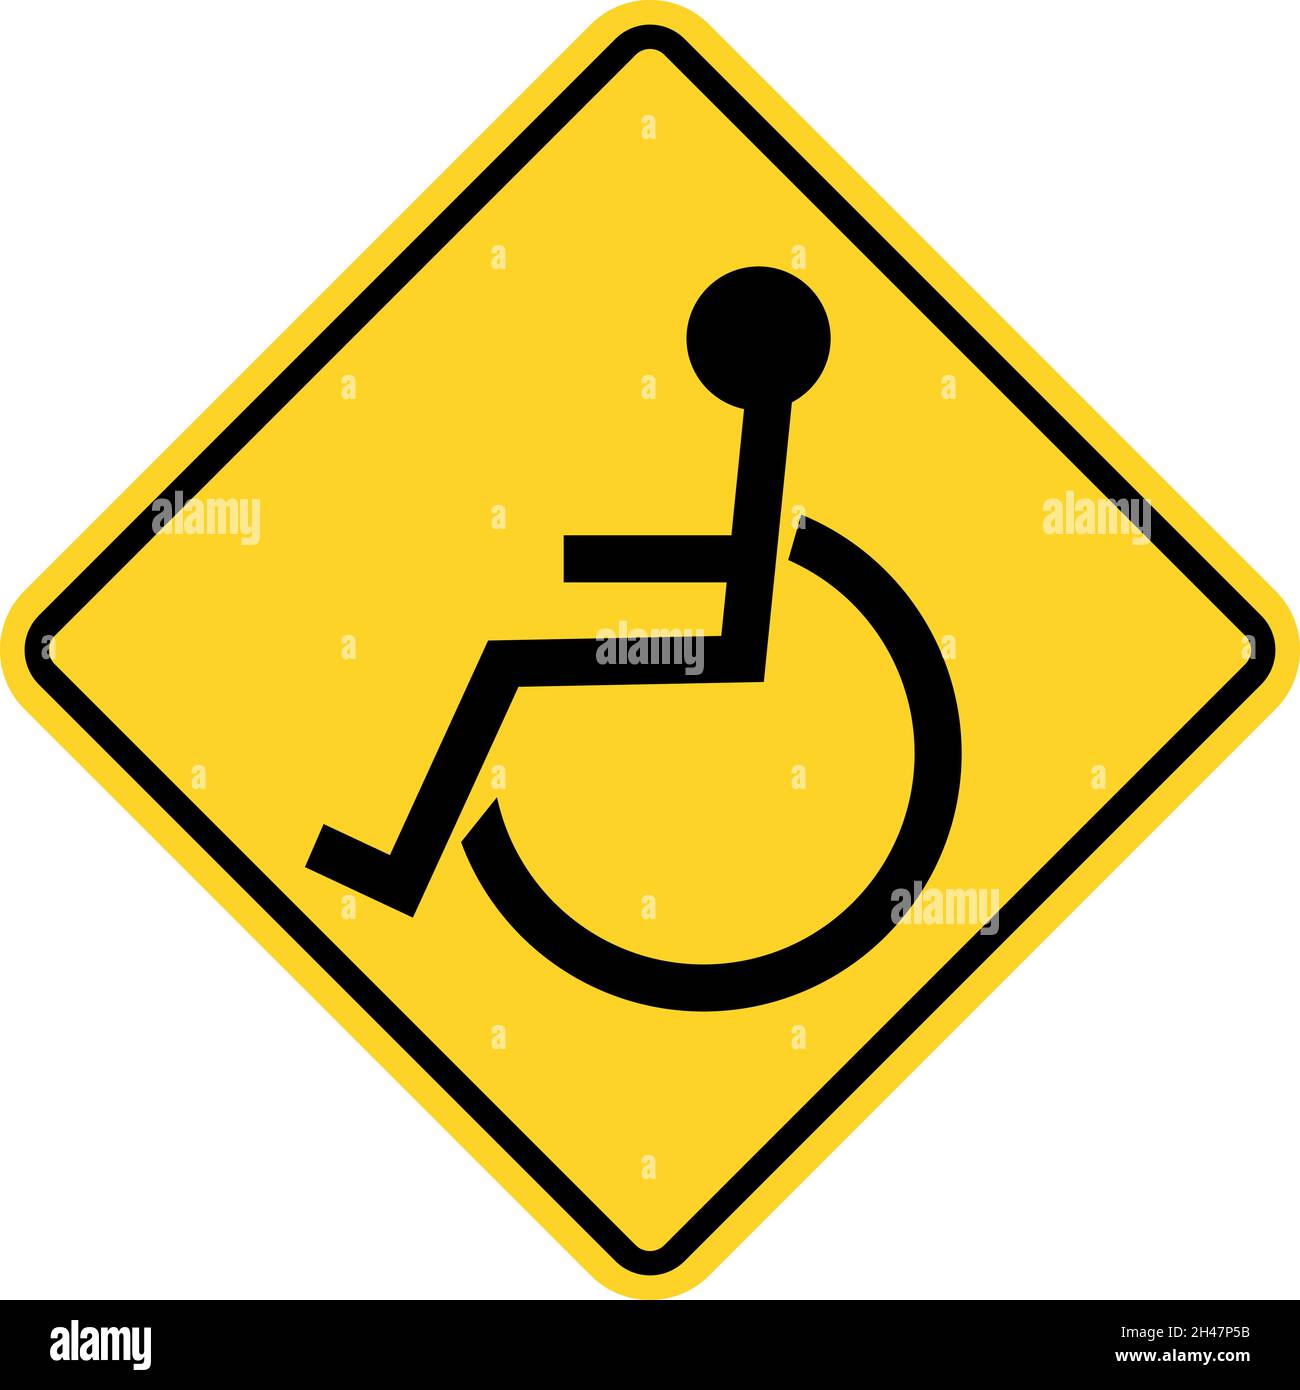 Wheel chair handicapped warning sign. Yellow diamond background. Traffic signs and symbols. Stock Vector